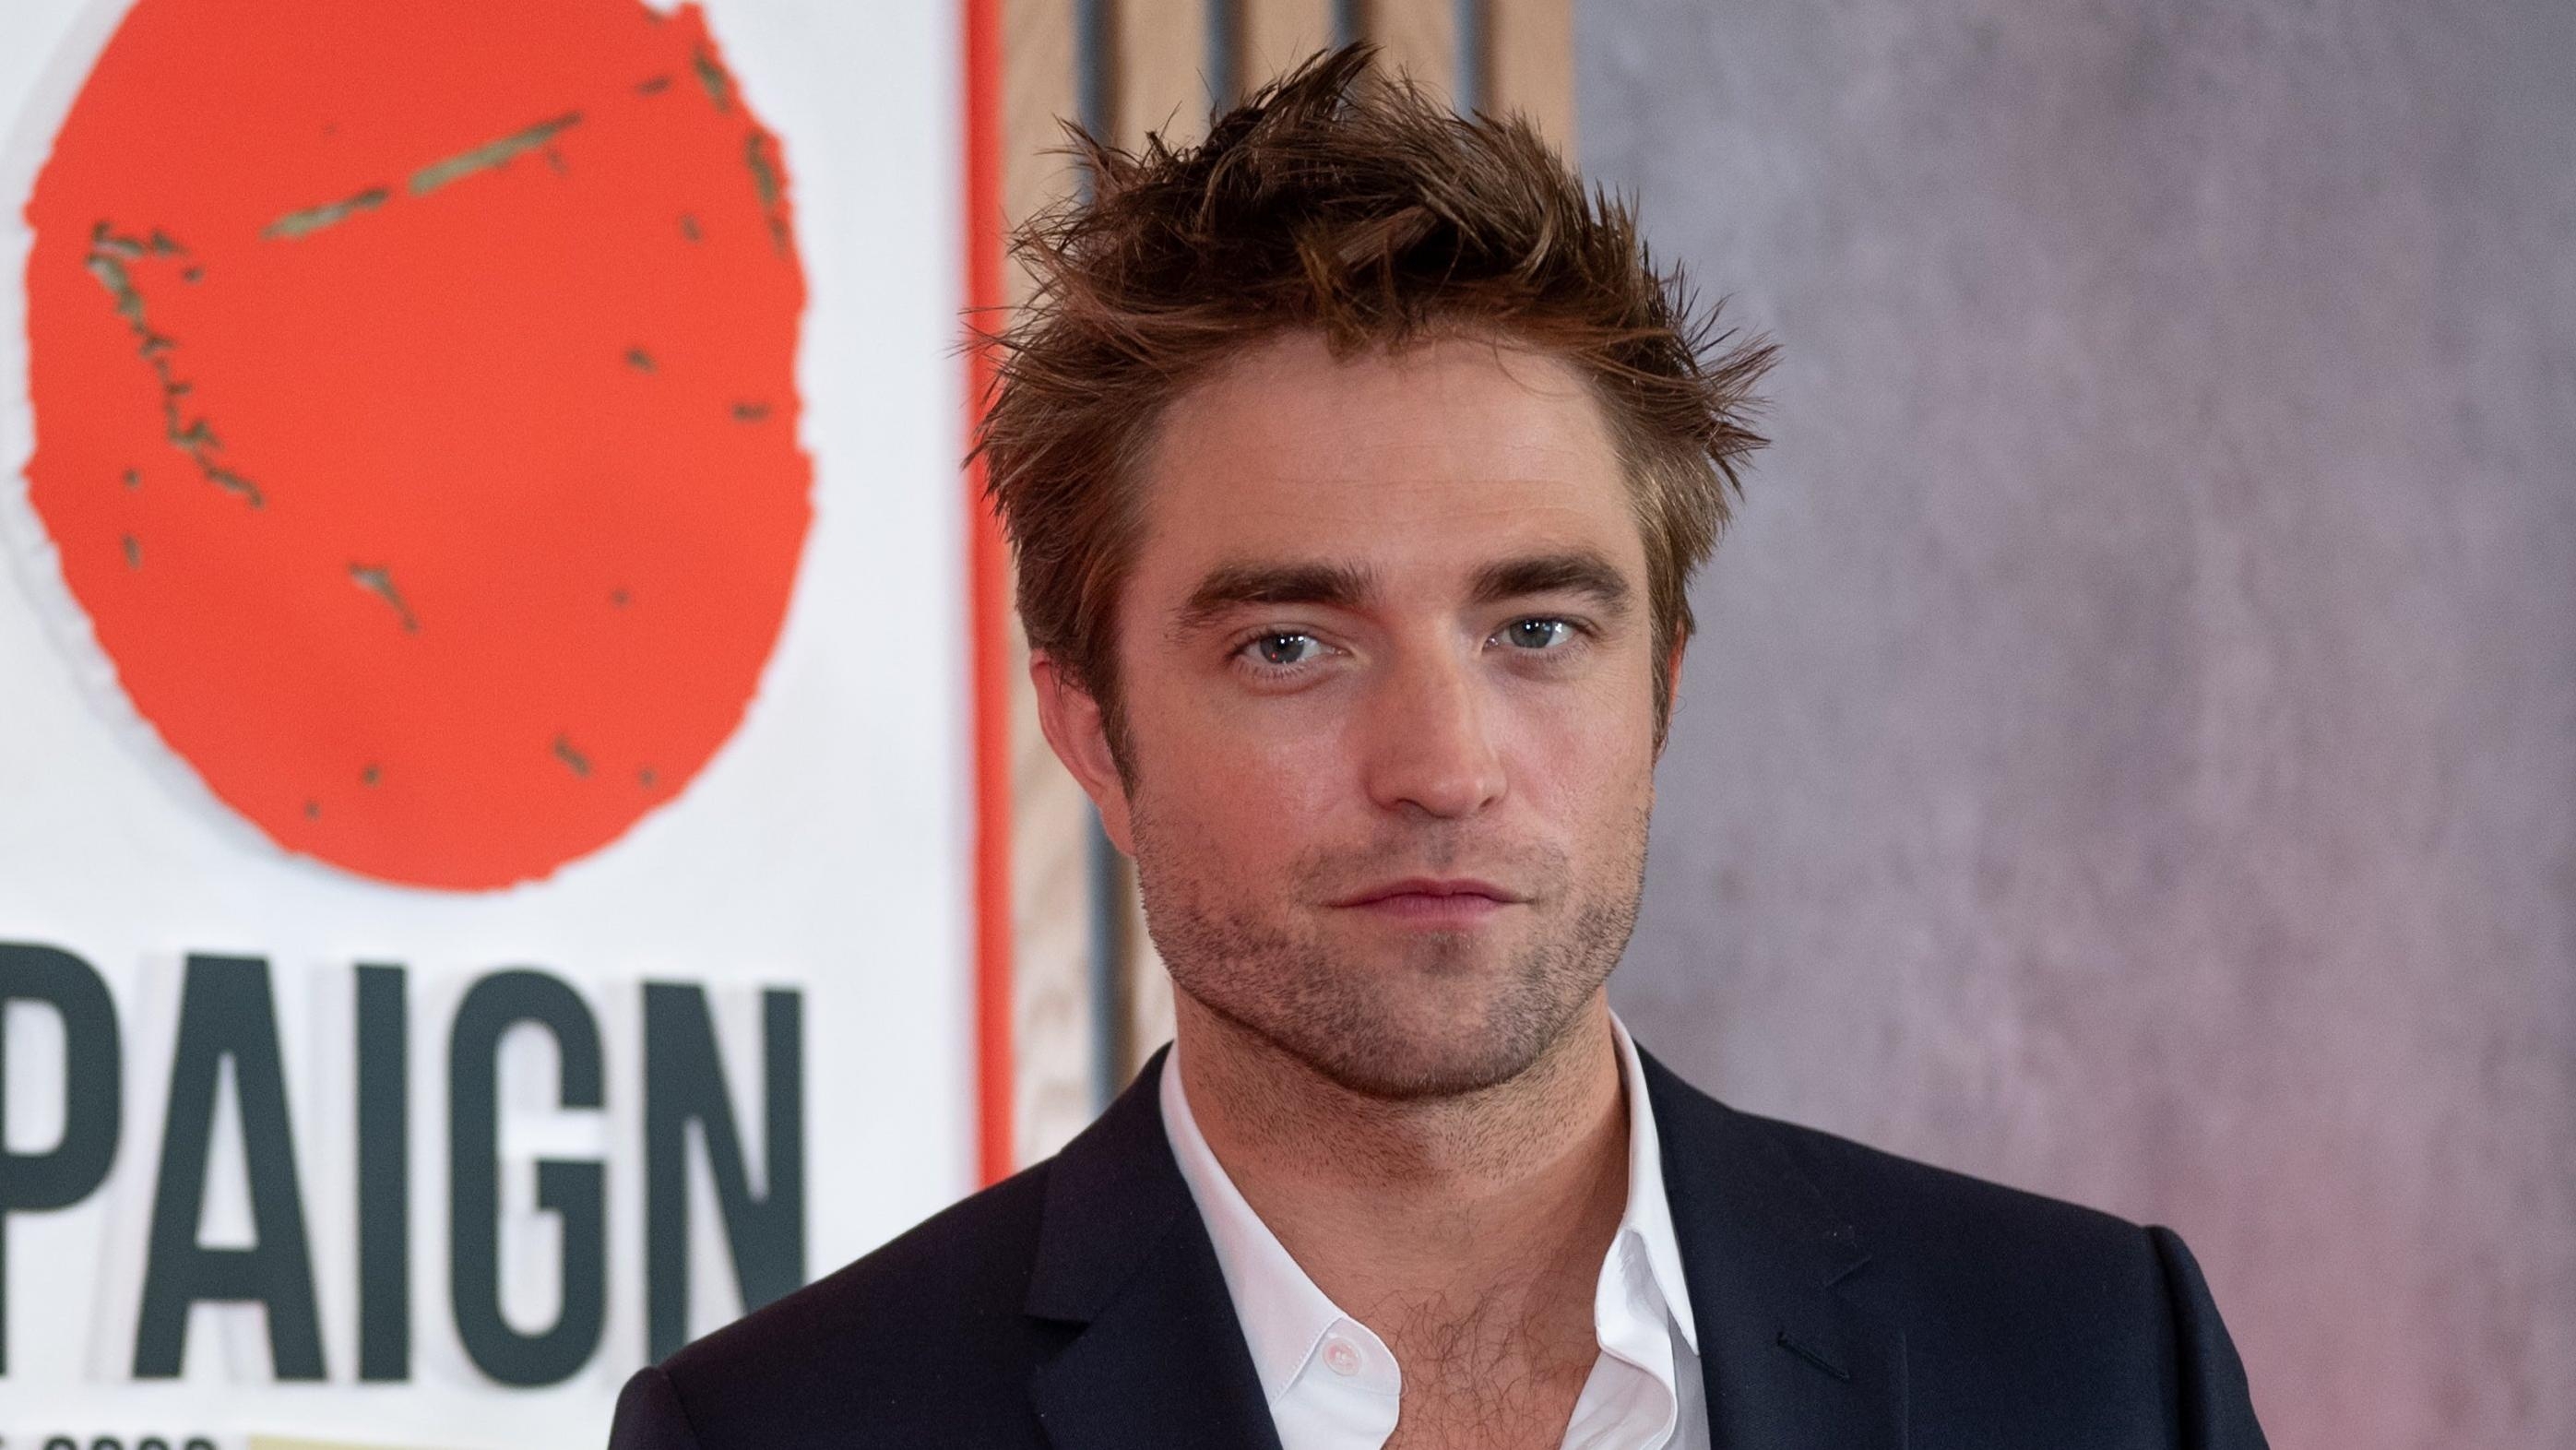 Robert Pattinson says he “would love” to do his own Batman trilogy